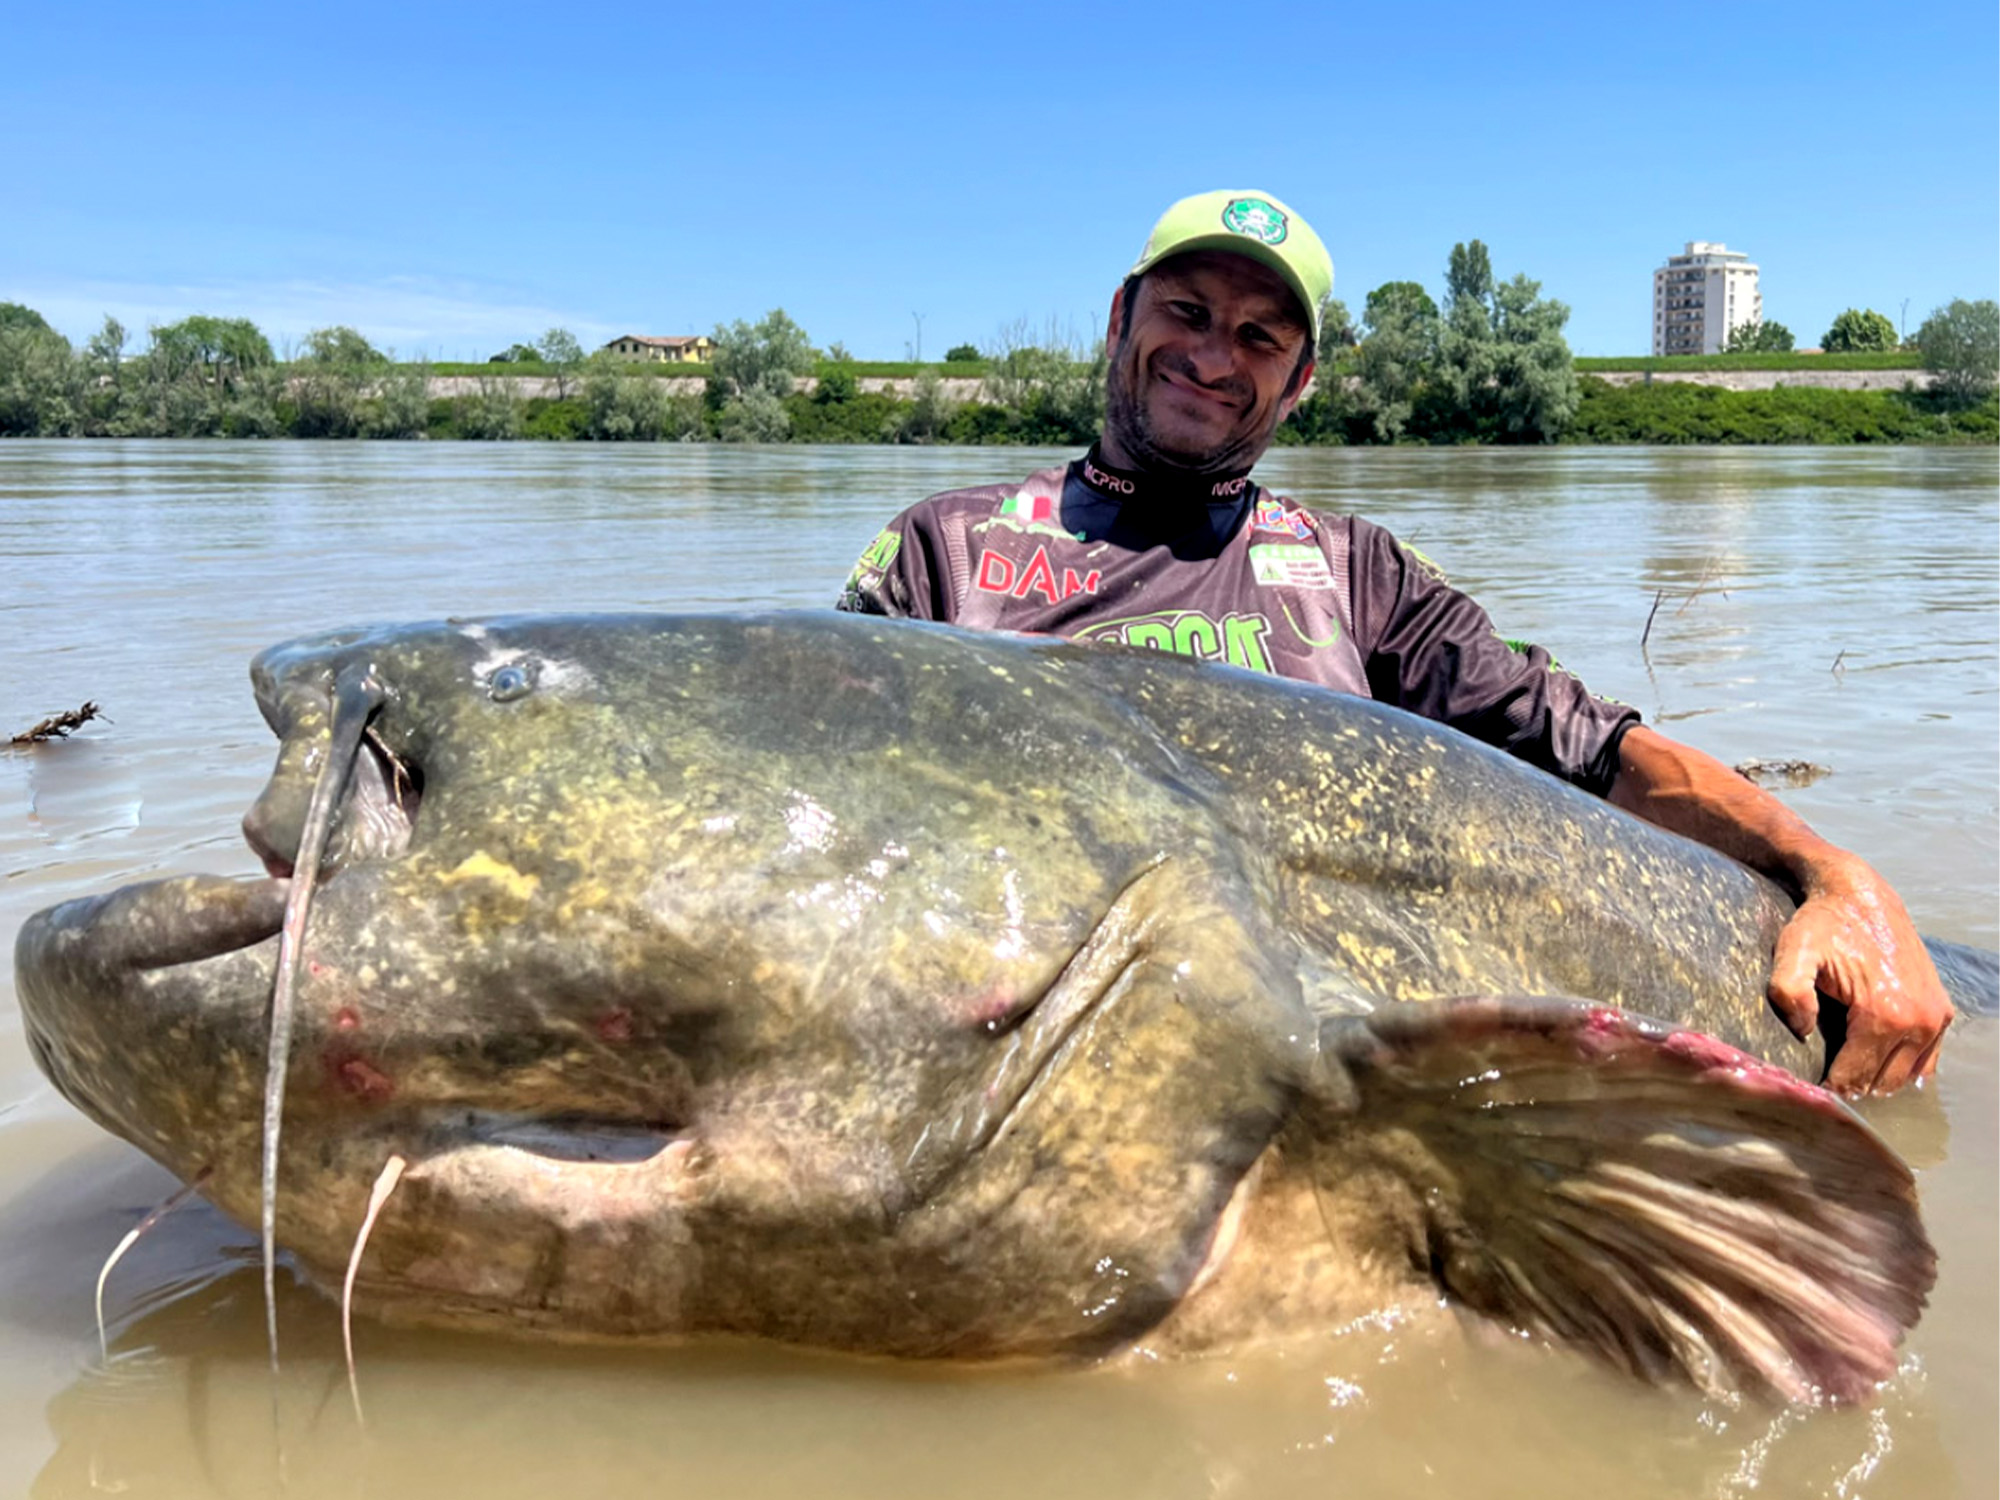 Italian Angler Catches Pending World-Record Wels Catfish Over 9 Feet Long